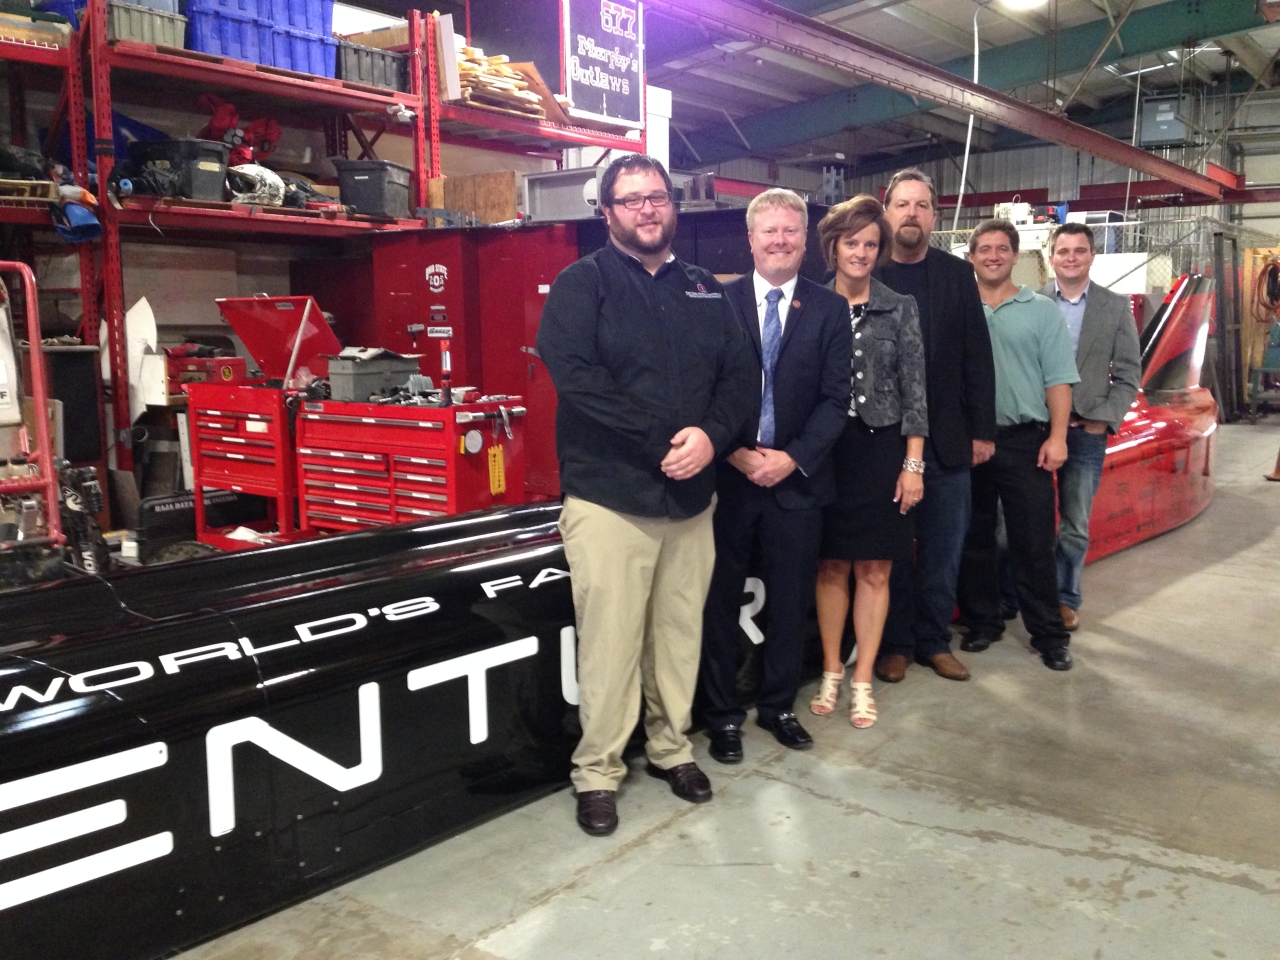 O'Brien tours CAR Technologies in support of alternative fuels